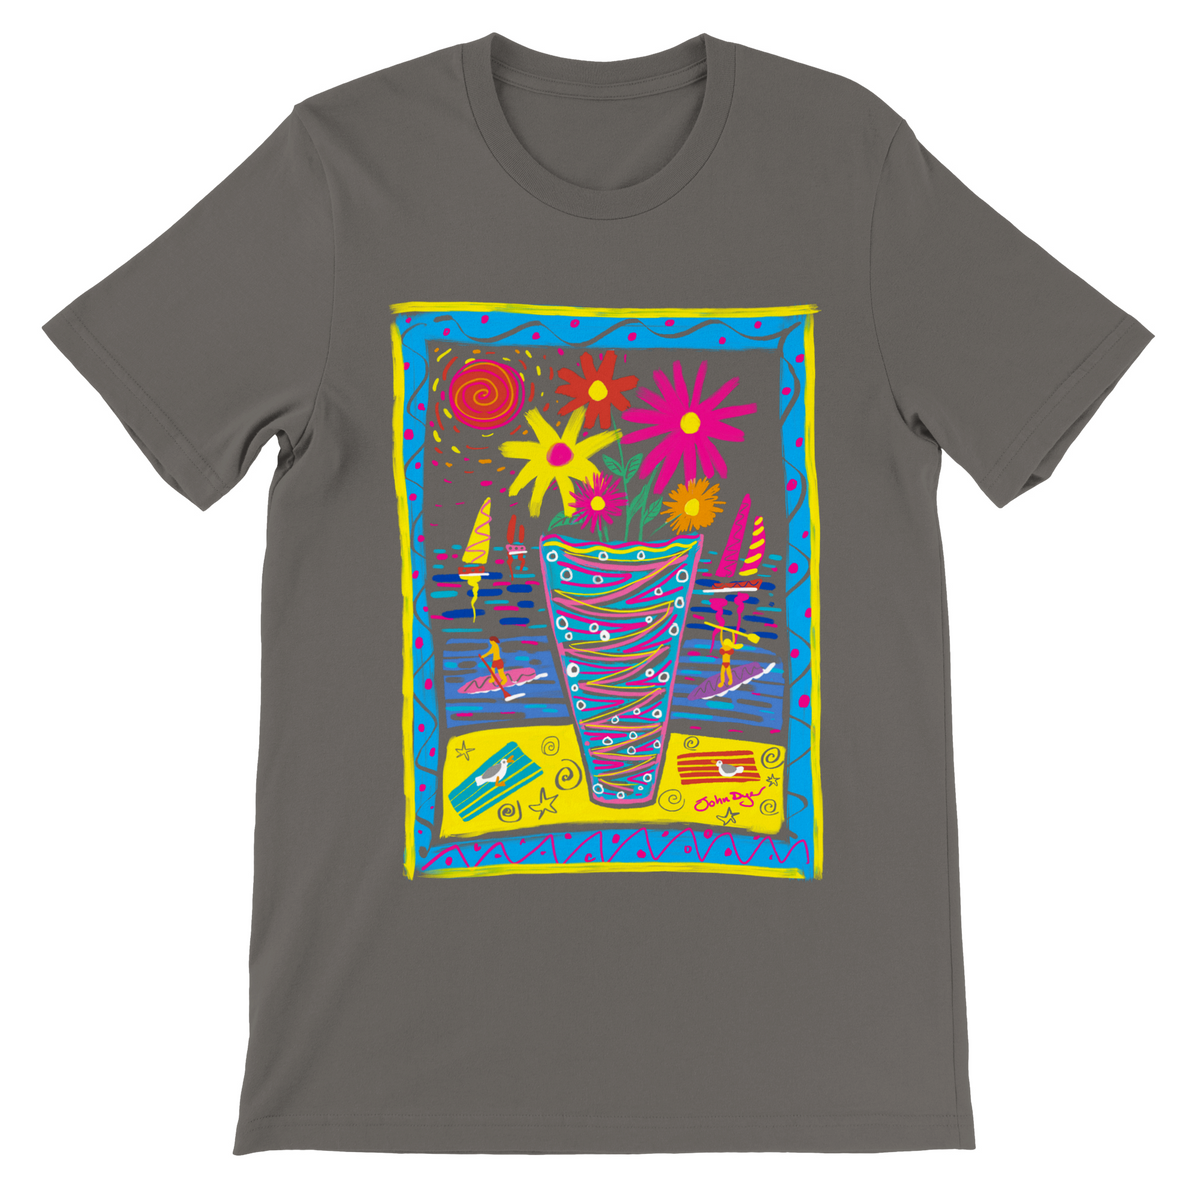 John Dyer Unisex Art T-Shirt. Summer Paddle Boarding Cornwall with Sailing Boats and Flowers